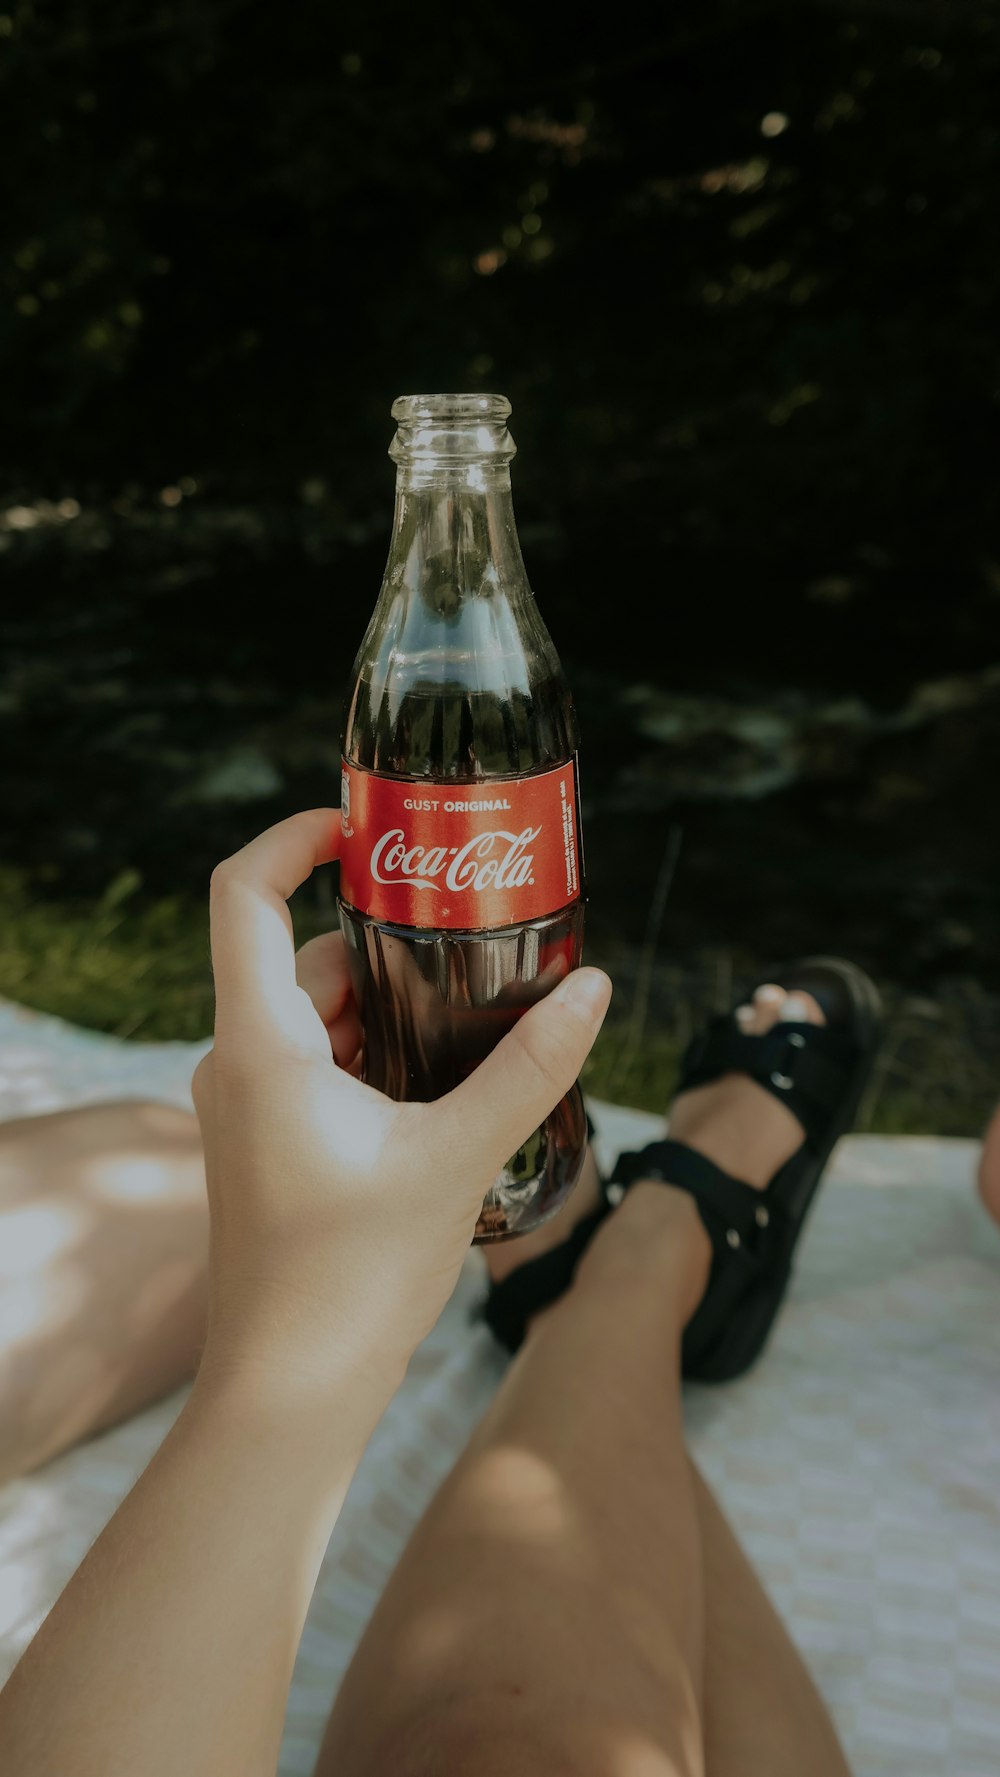 coca cola bottle on persons hand